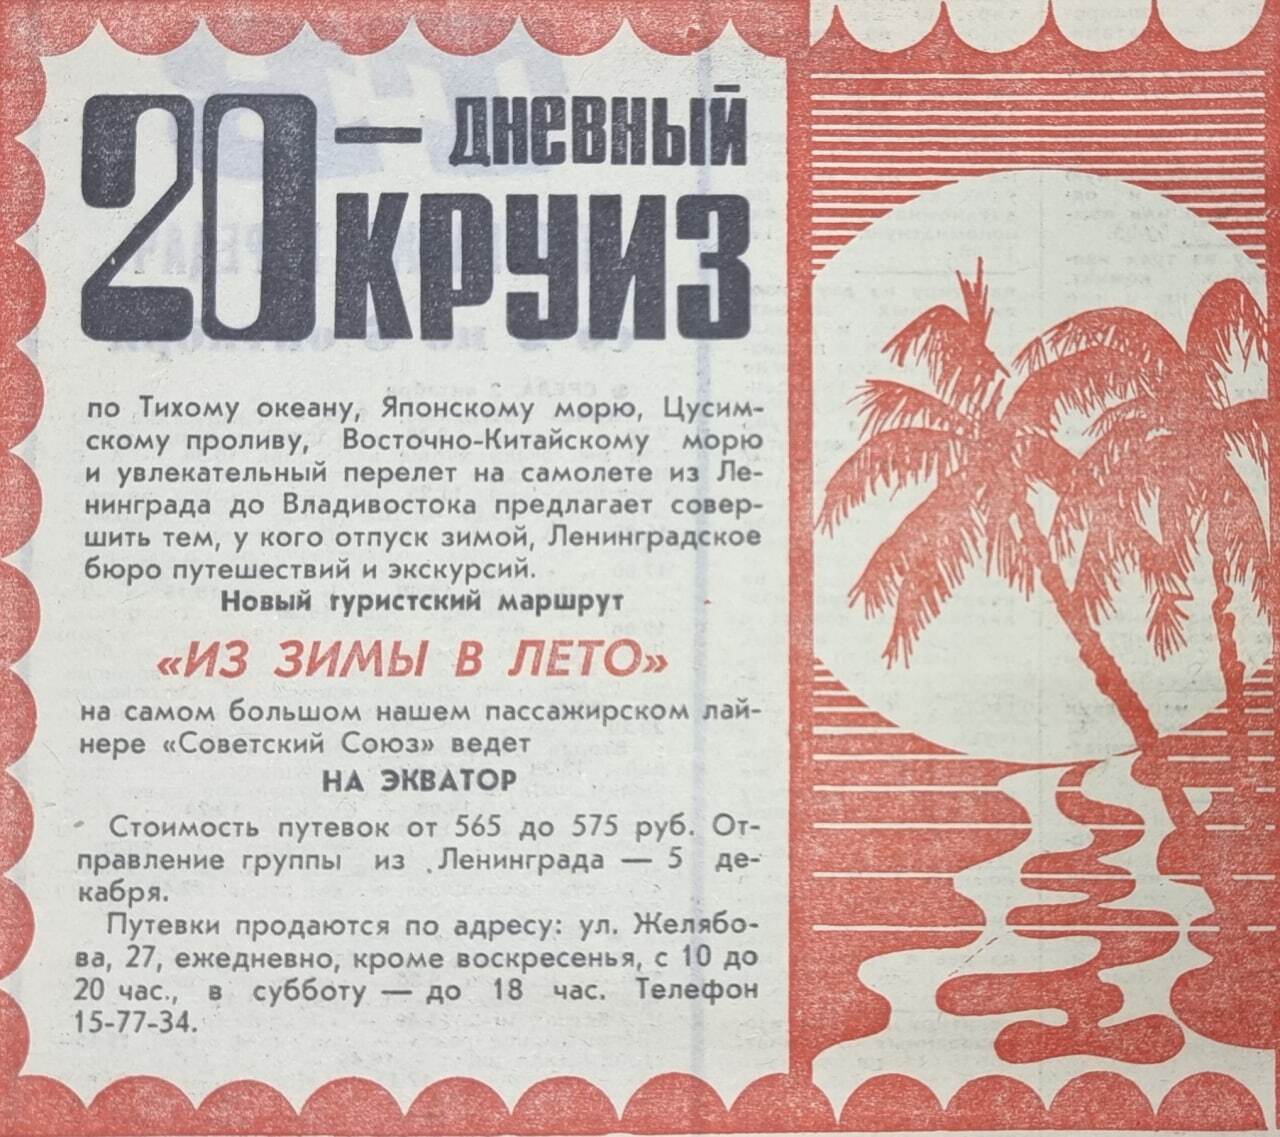 Cruise in the Pacific - the USSR, Clippings from newspapers and magazines, 1974, Cruise